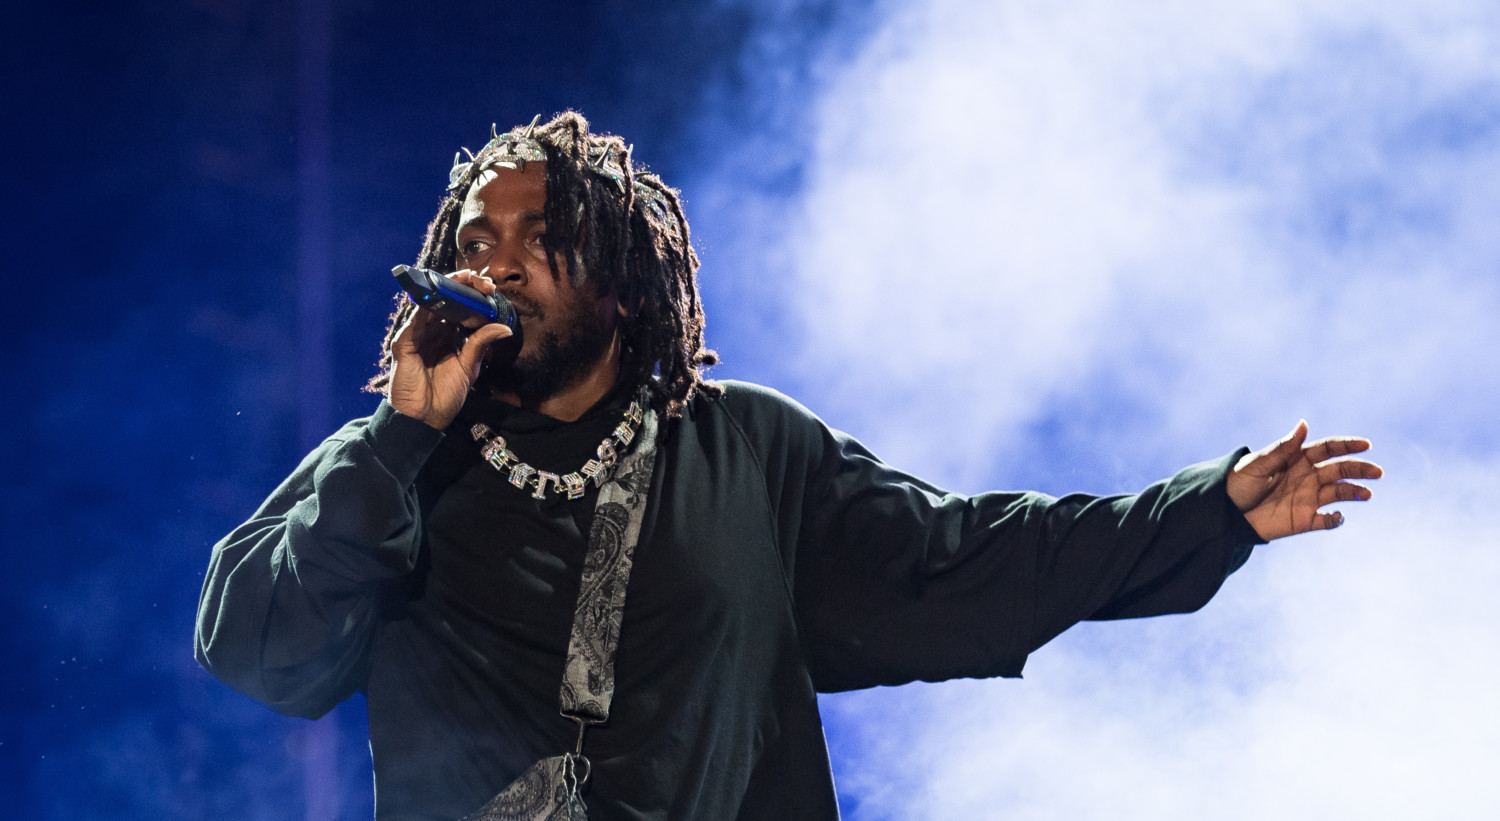 Kendrick Lamar's 'The Big Steppers' Tour Takes Performance Art to